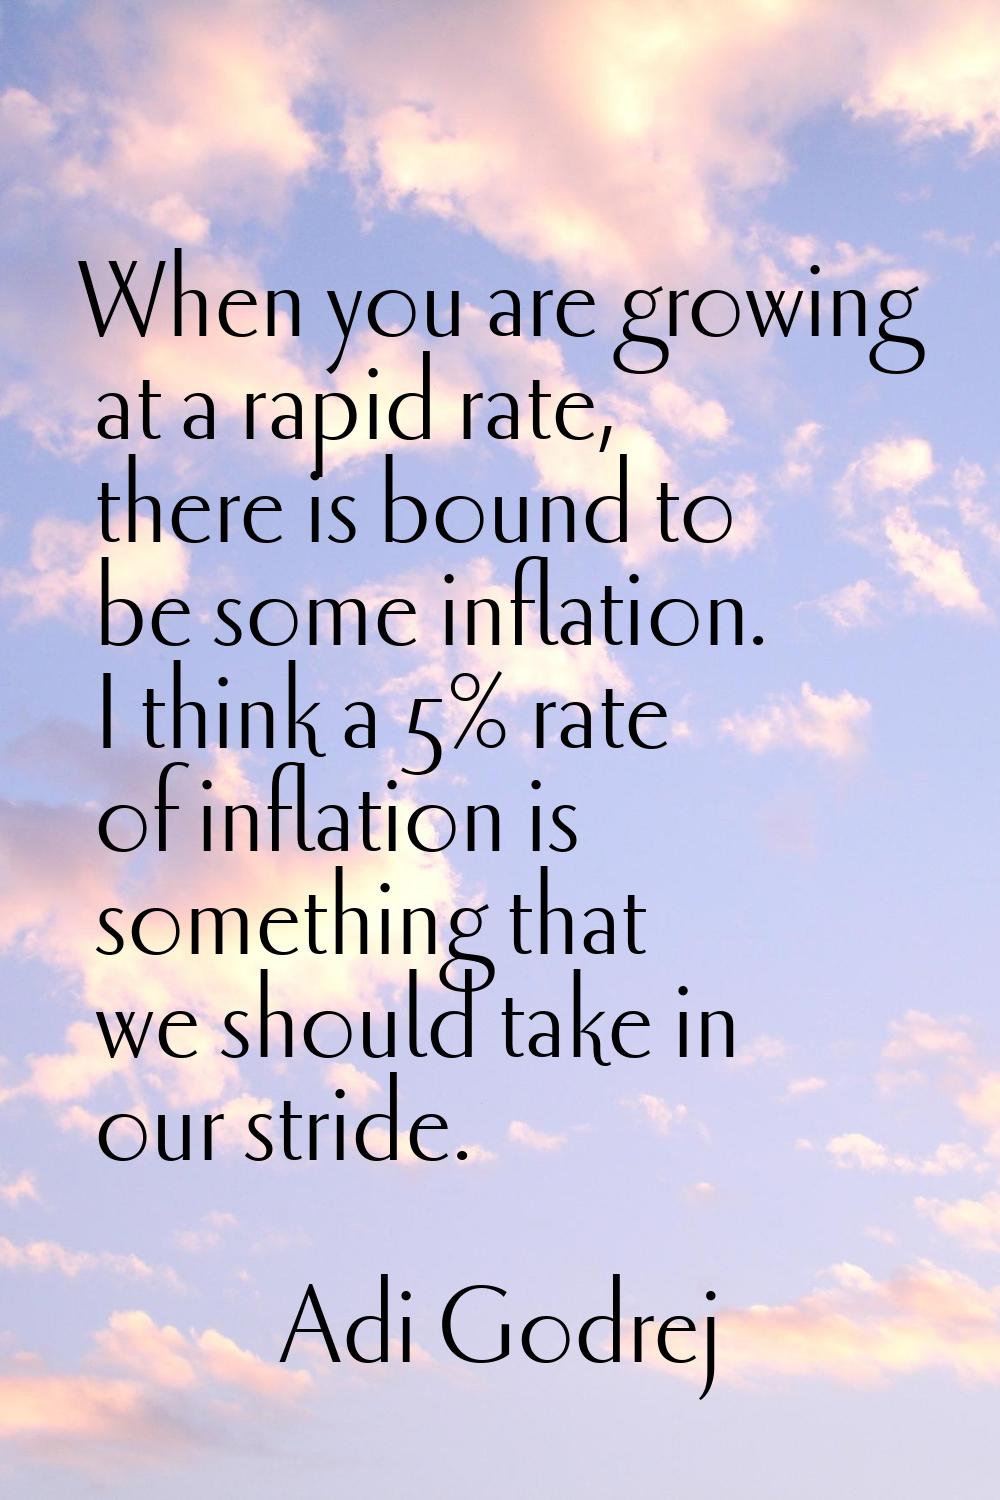 When you are growing at a rapid rate, there is bound to be some inflation. I think a 5% rate of inf